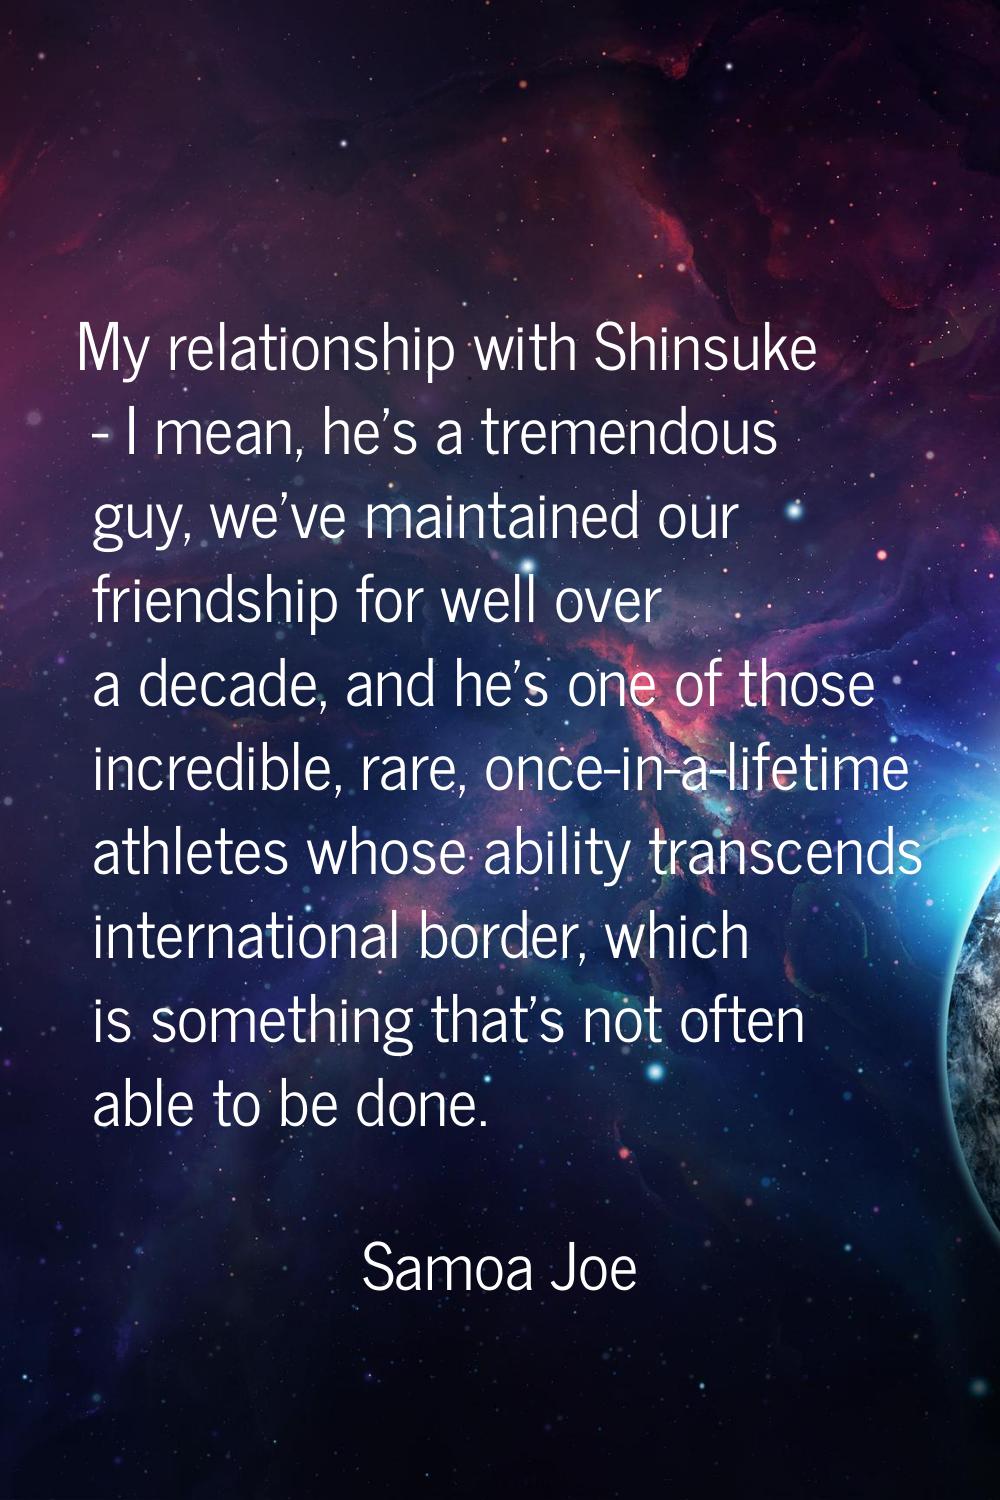 My relationship with Shinsuke - I mean, he's a tremendous guy, we've maintained our friendship for 